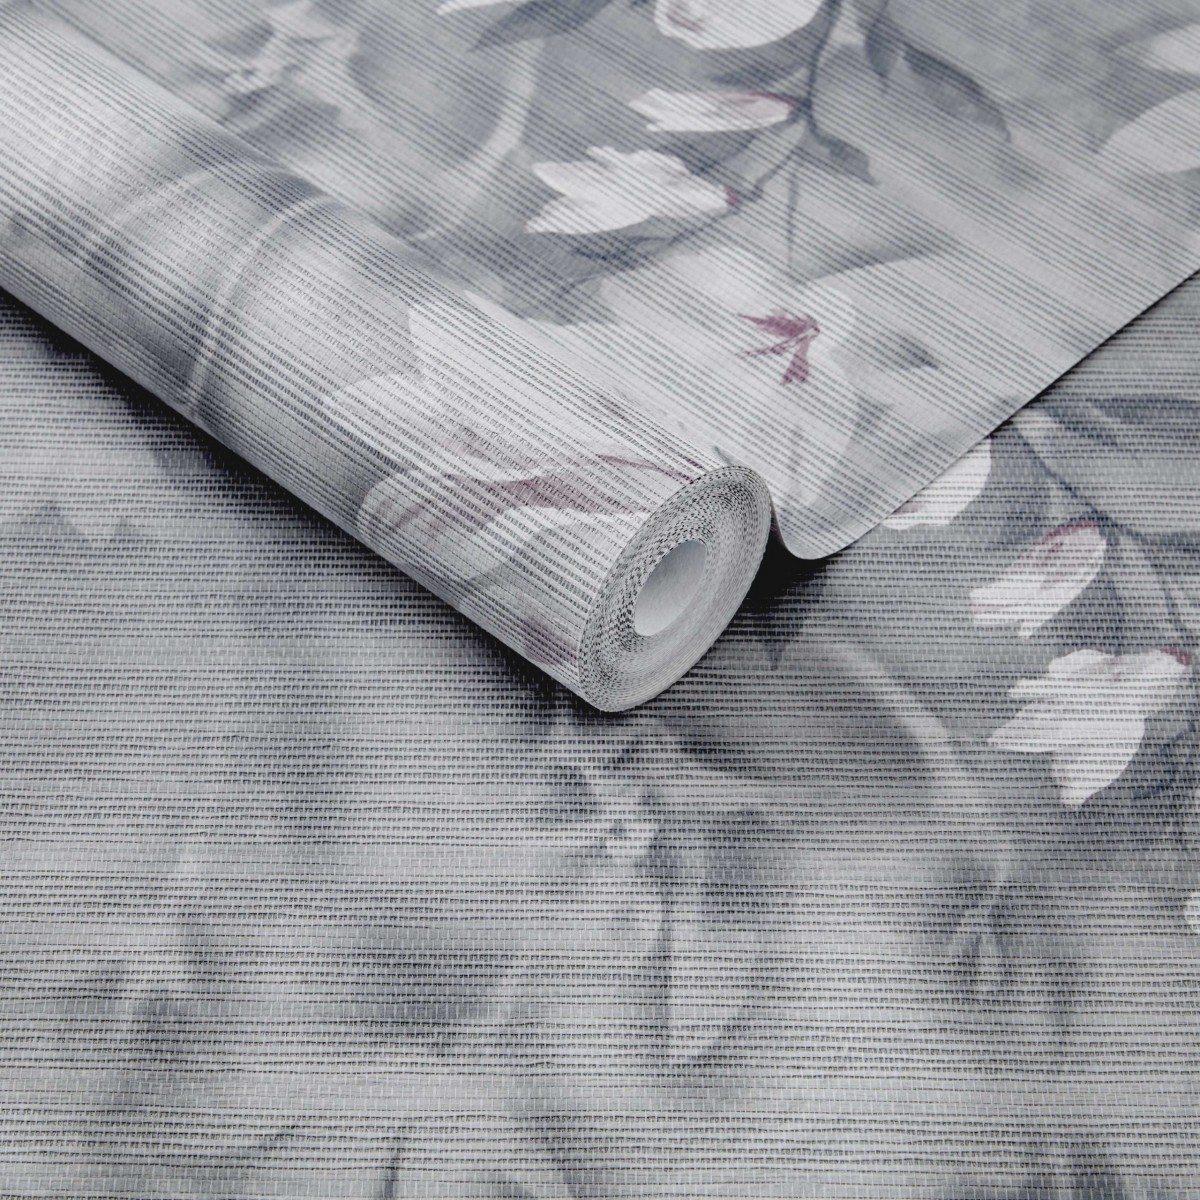 Tapet Trailing Magnolia, Mist Grey Luxury Floral Paperweave, 1838 Wallcoverings, 5.2mp / rola, Tapet living 